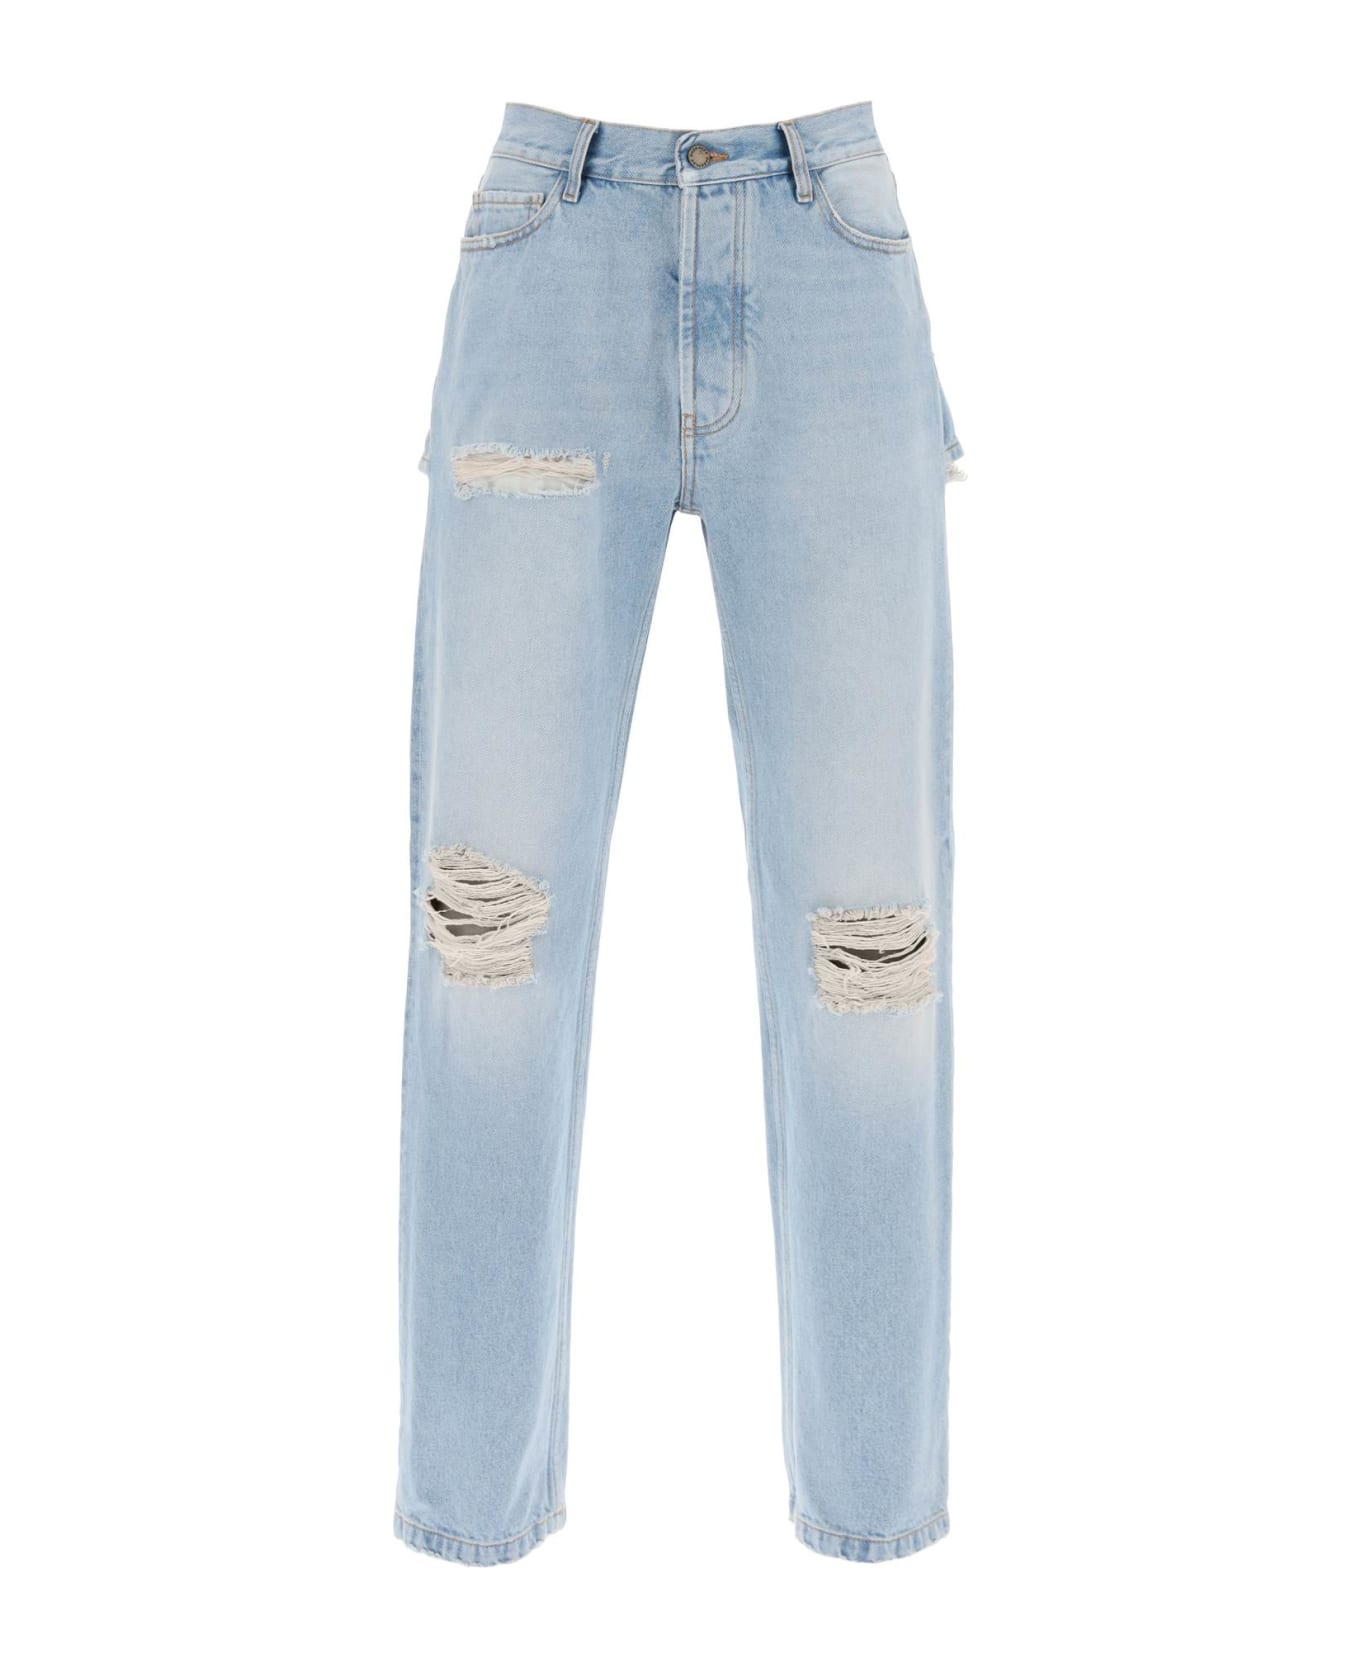 DARKPARK Naomi Jeans With Rips And Cut Outs - LIGHT WASH RIPPED (Light blue) デニム